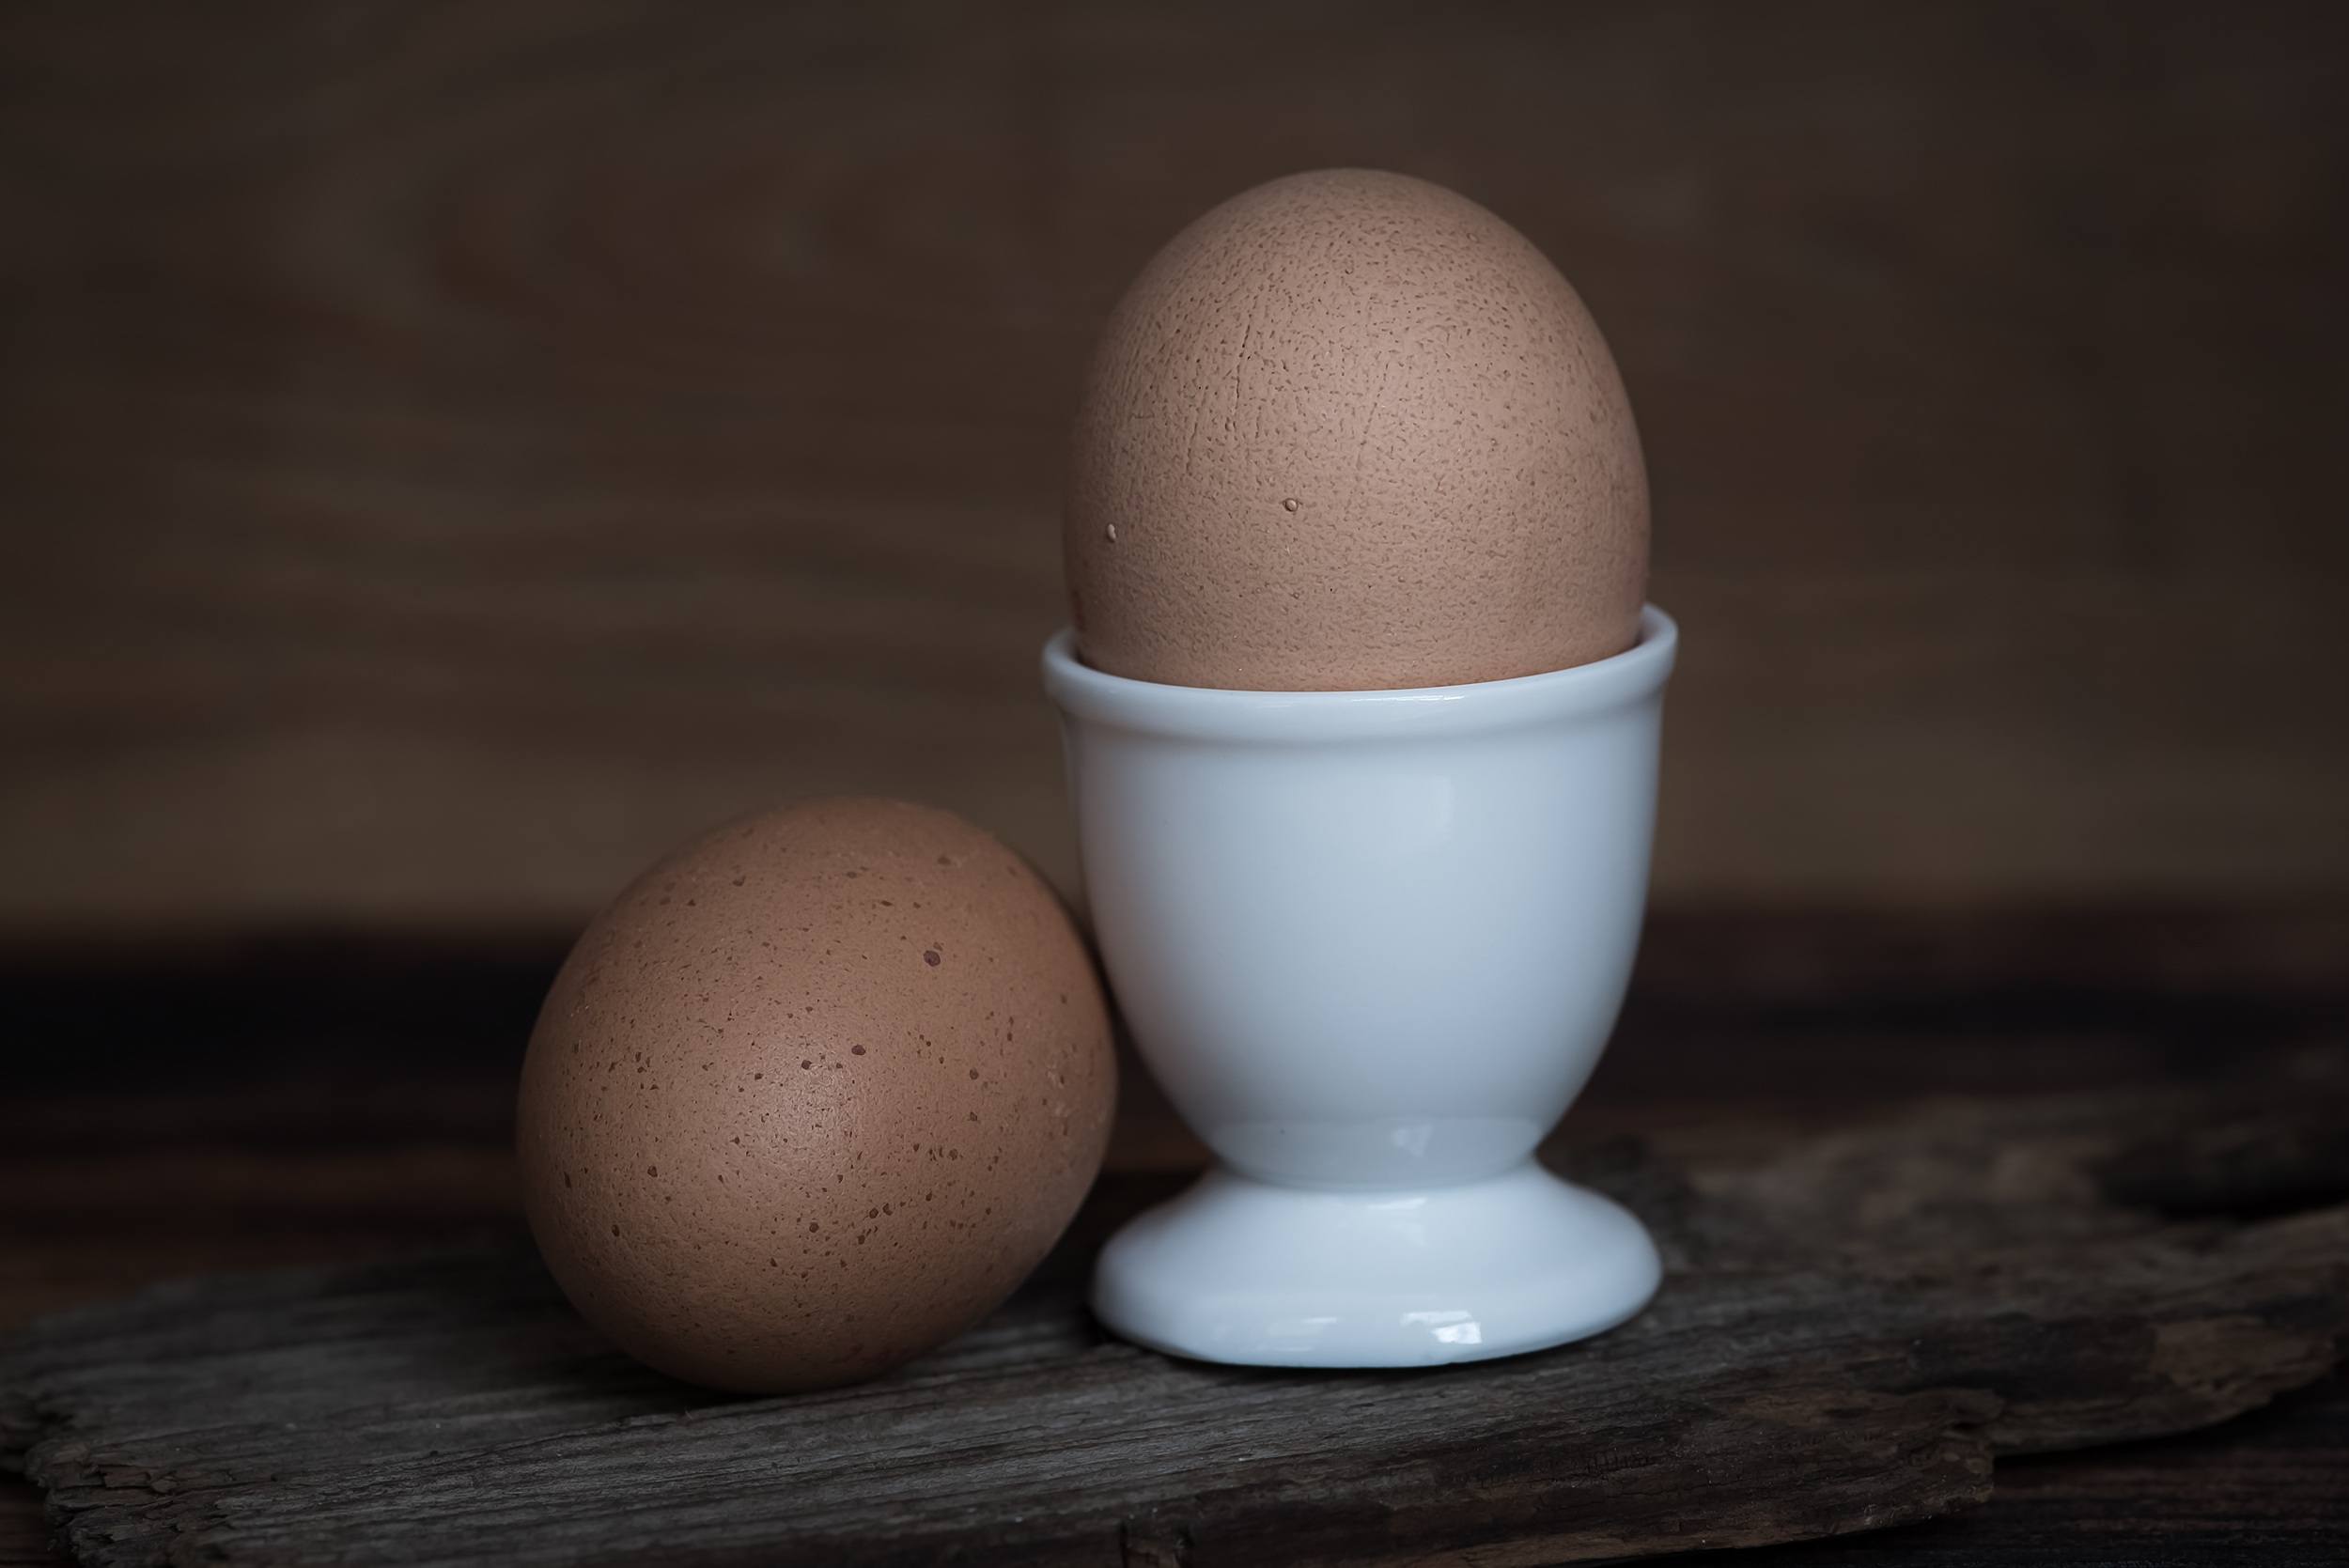 You are currently viewing An egg-cellent question: What’s the deal with eggs?